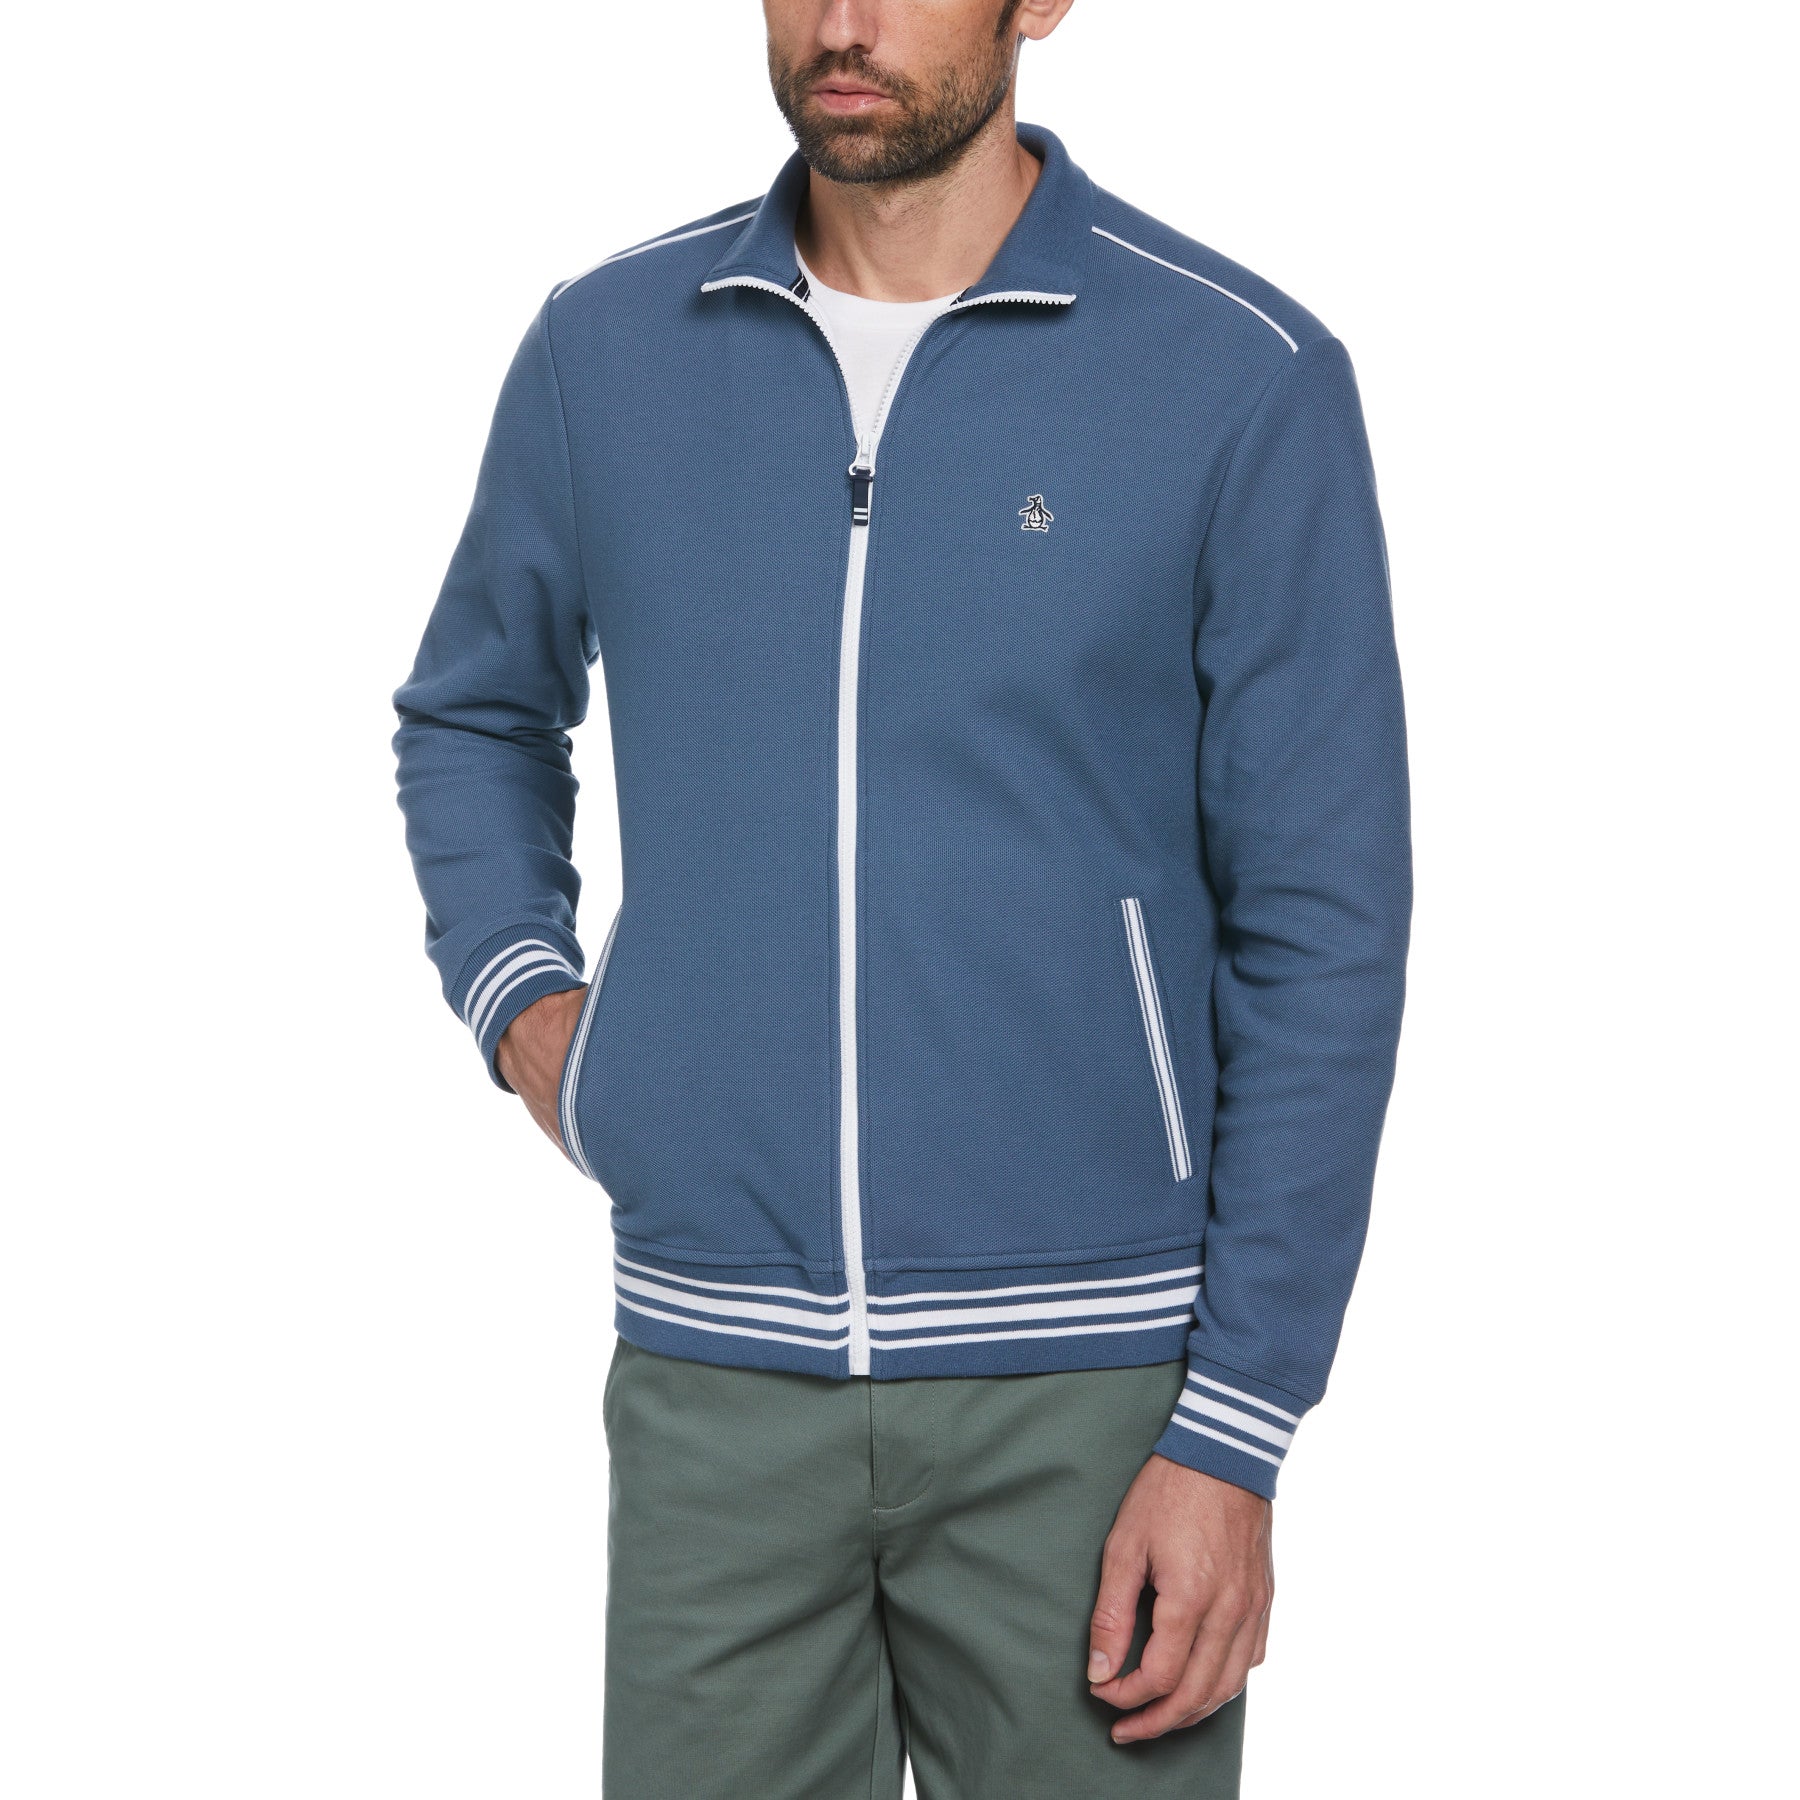 View Double Knit Coolmax Track Jacket In Bering Sea information